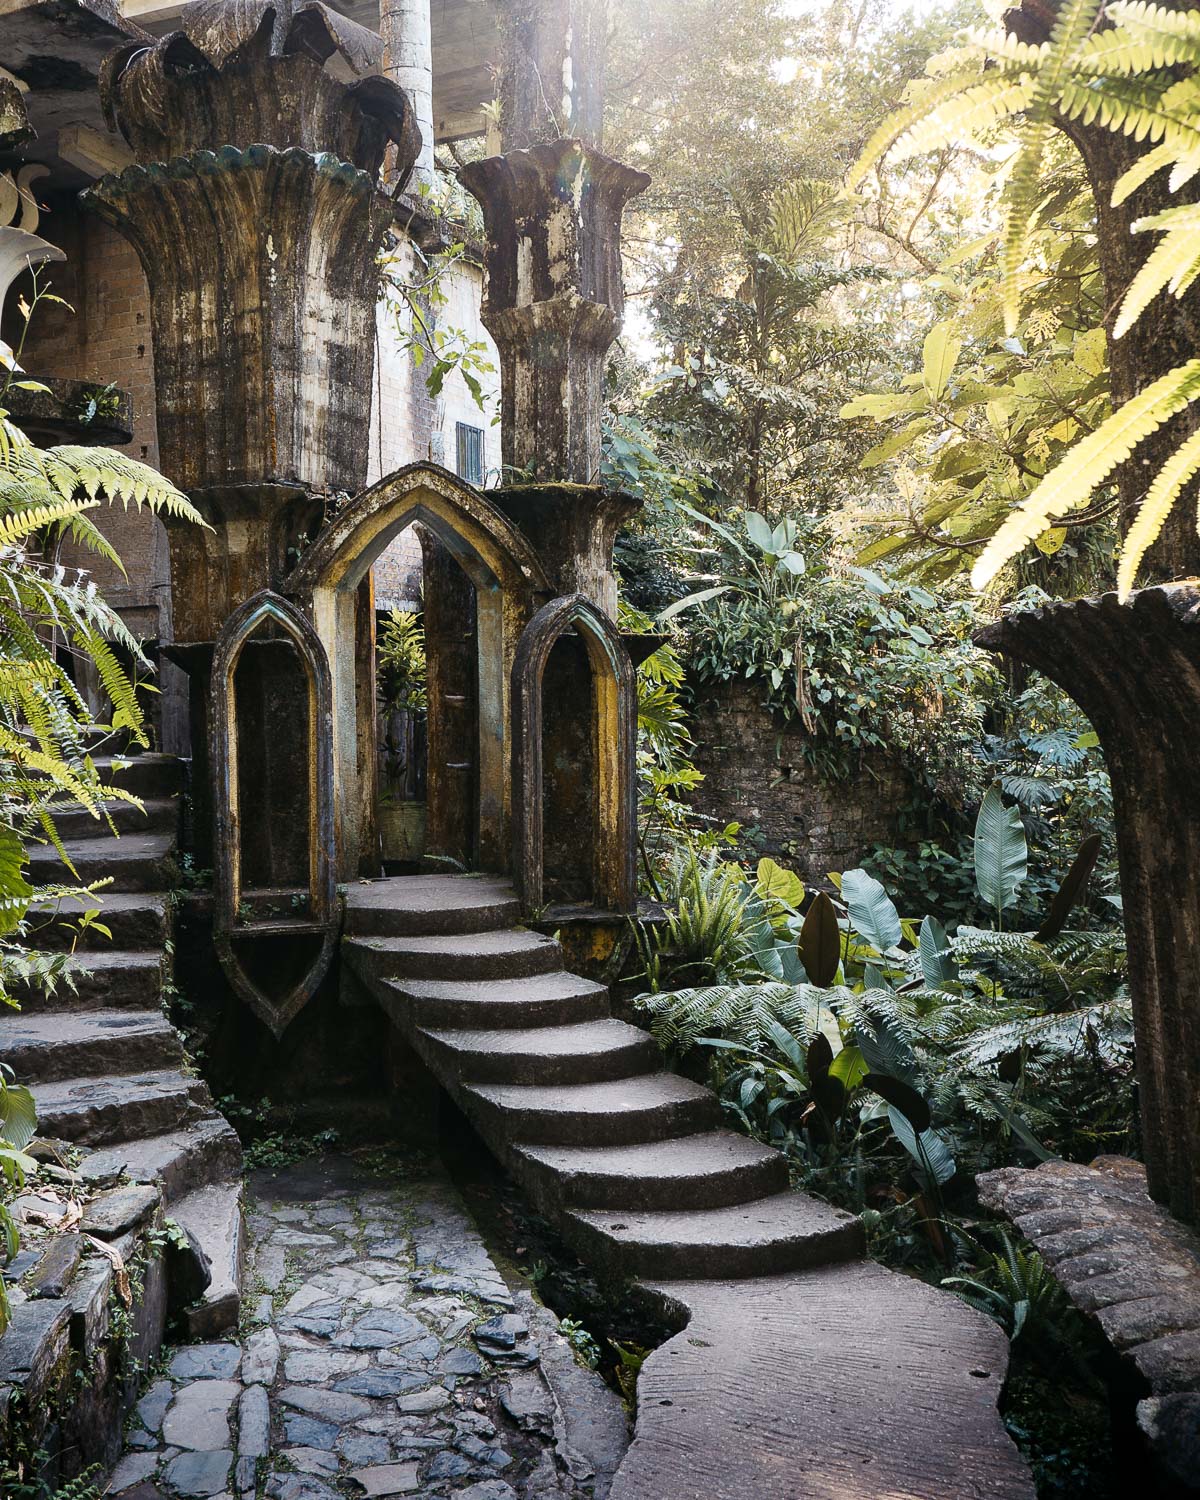 Edward James' Surrealist Garden, surrealistic buildings in the middle of the forest